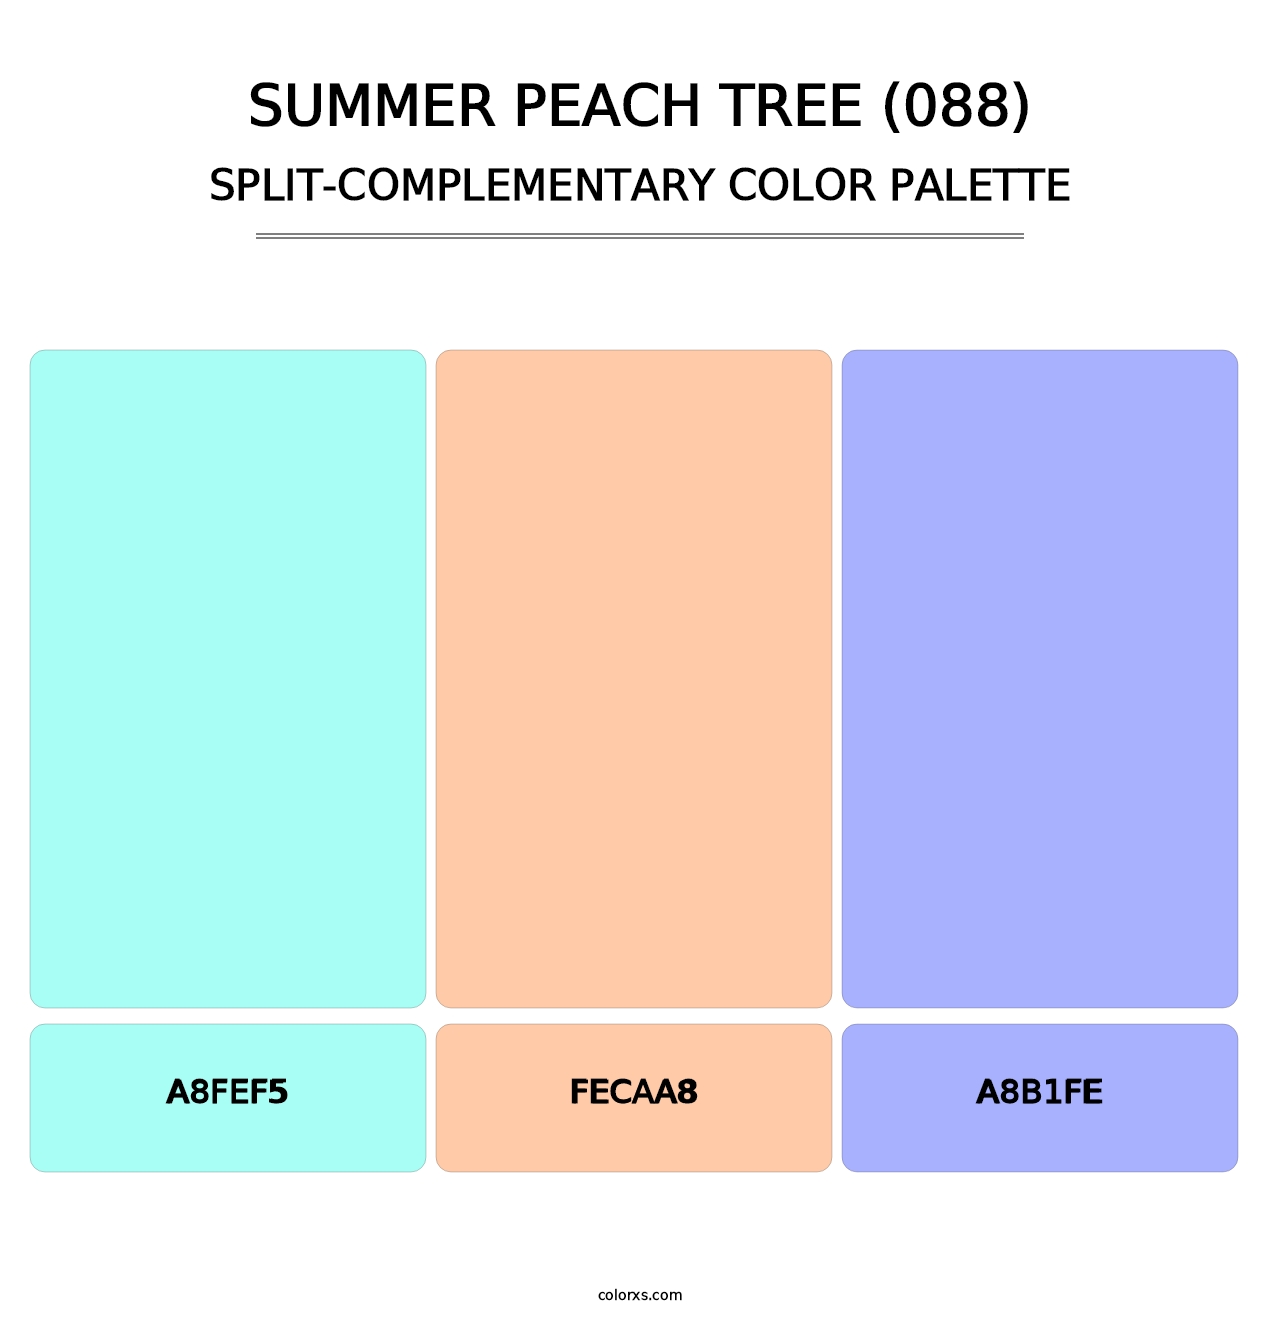 Summer Peach Tree (088) - Split-Complementary Color Palette